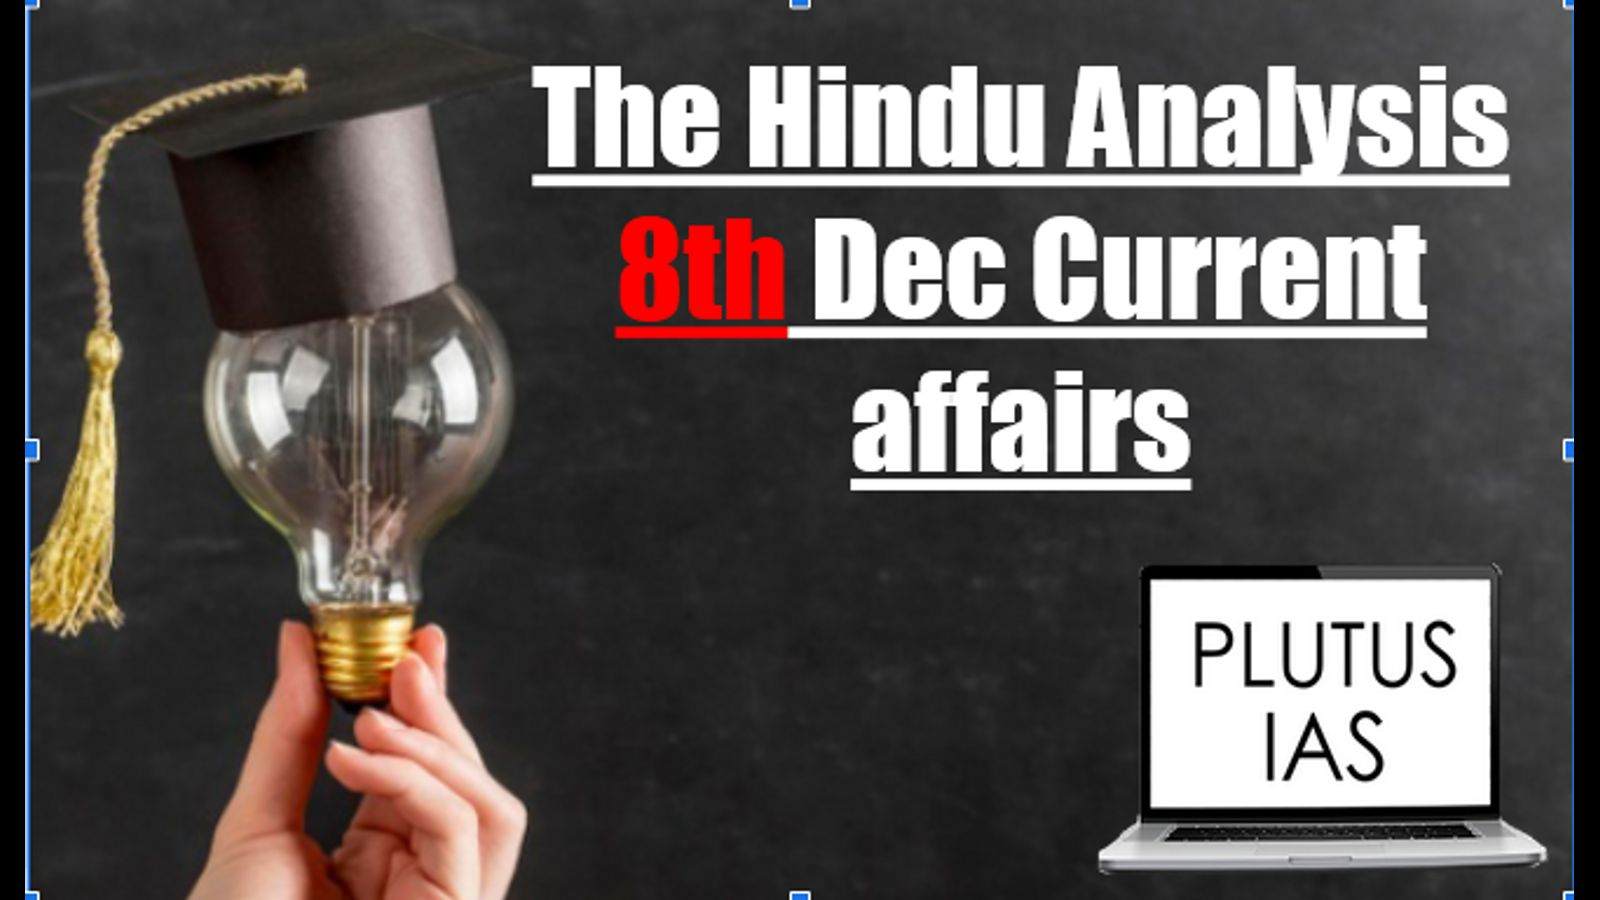 The Hindu Analysis 8th December Current Affairs